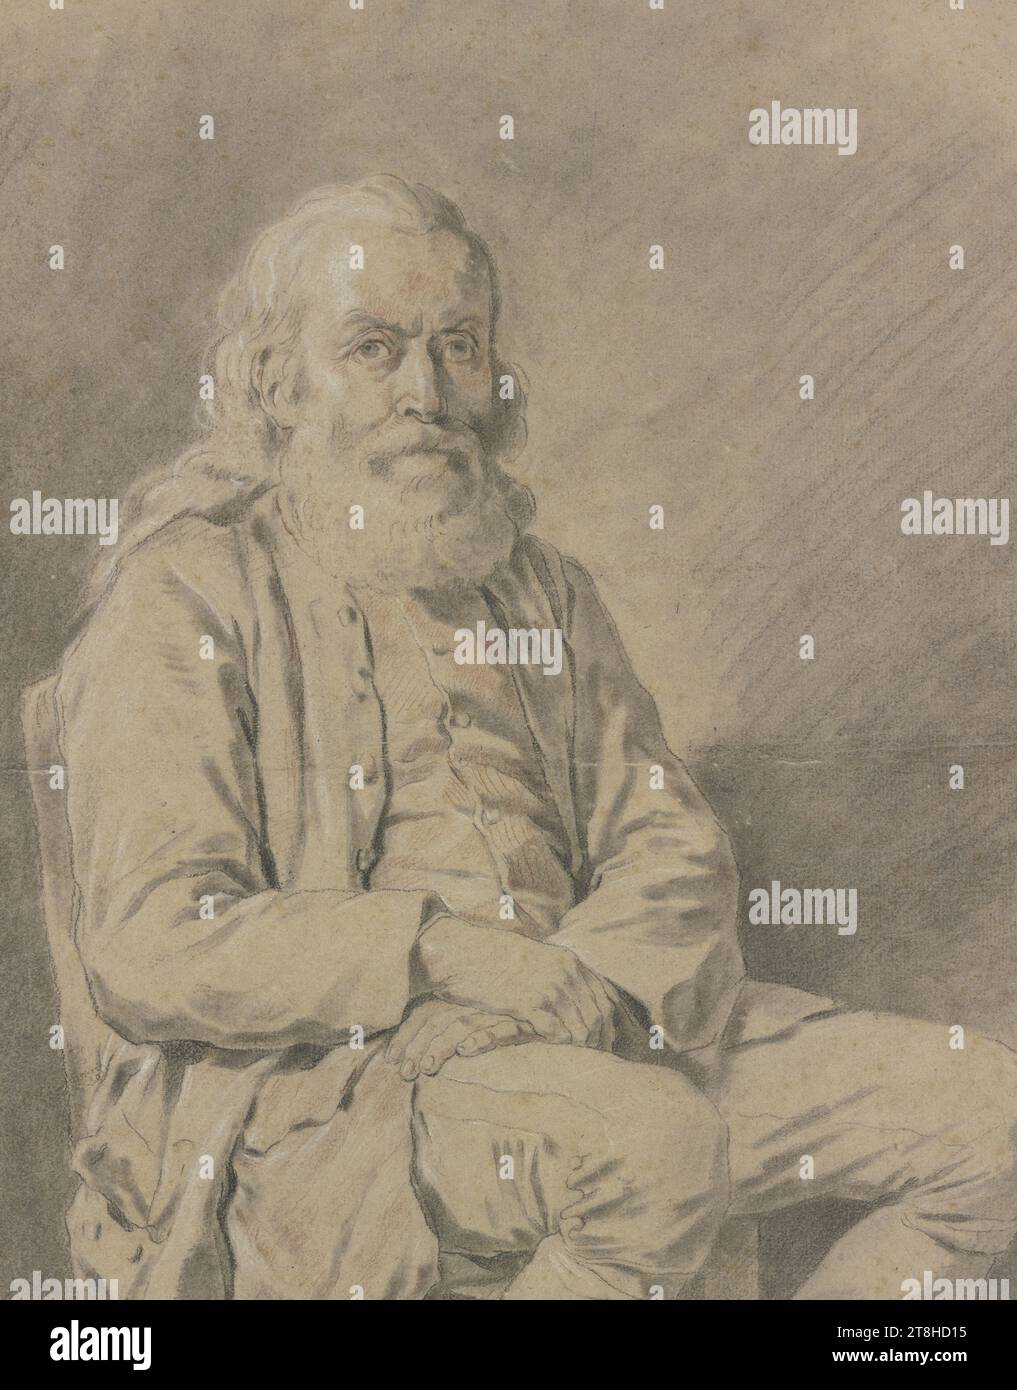 NICOLAS-BERNARD LÉPICIÉ, portrait of a seated old man, ca. 1774, sheet, 419 x 335 mm, black and red chalk, gray wash, heightened with white, chalk, on handmade paper, portrait of a seated old man, NICOLAS-BERNARD LÉPICIÉ, 18TH CENTURY, CLASSICISM, DRAWING, black and red chalk, gray wash, white heightening, chalk, on handmade paper, CHALK, INK?, INK?, HAND PAPER, CHALK DRAWING, WASH, WHITE HEIGHTENING, FRENCH, PICTURE DRAWING, PORTRAIT STUDY Stock Photo